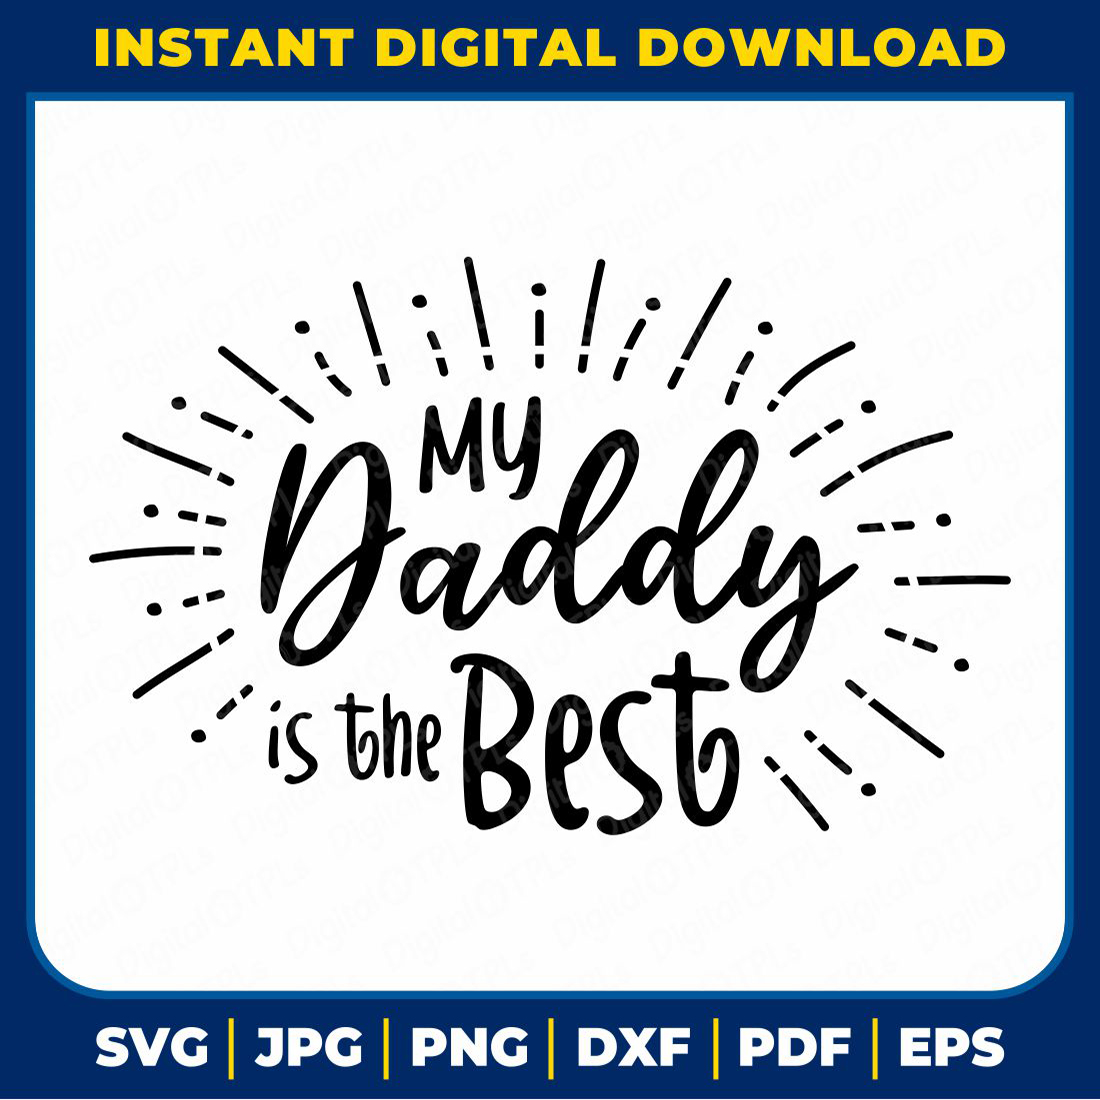 My Daddy Is the Best SVG | Father’s Day SVG, DXF, EPS, JPG, PNG & PDF Files cover image.